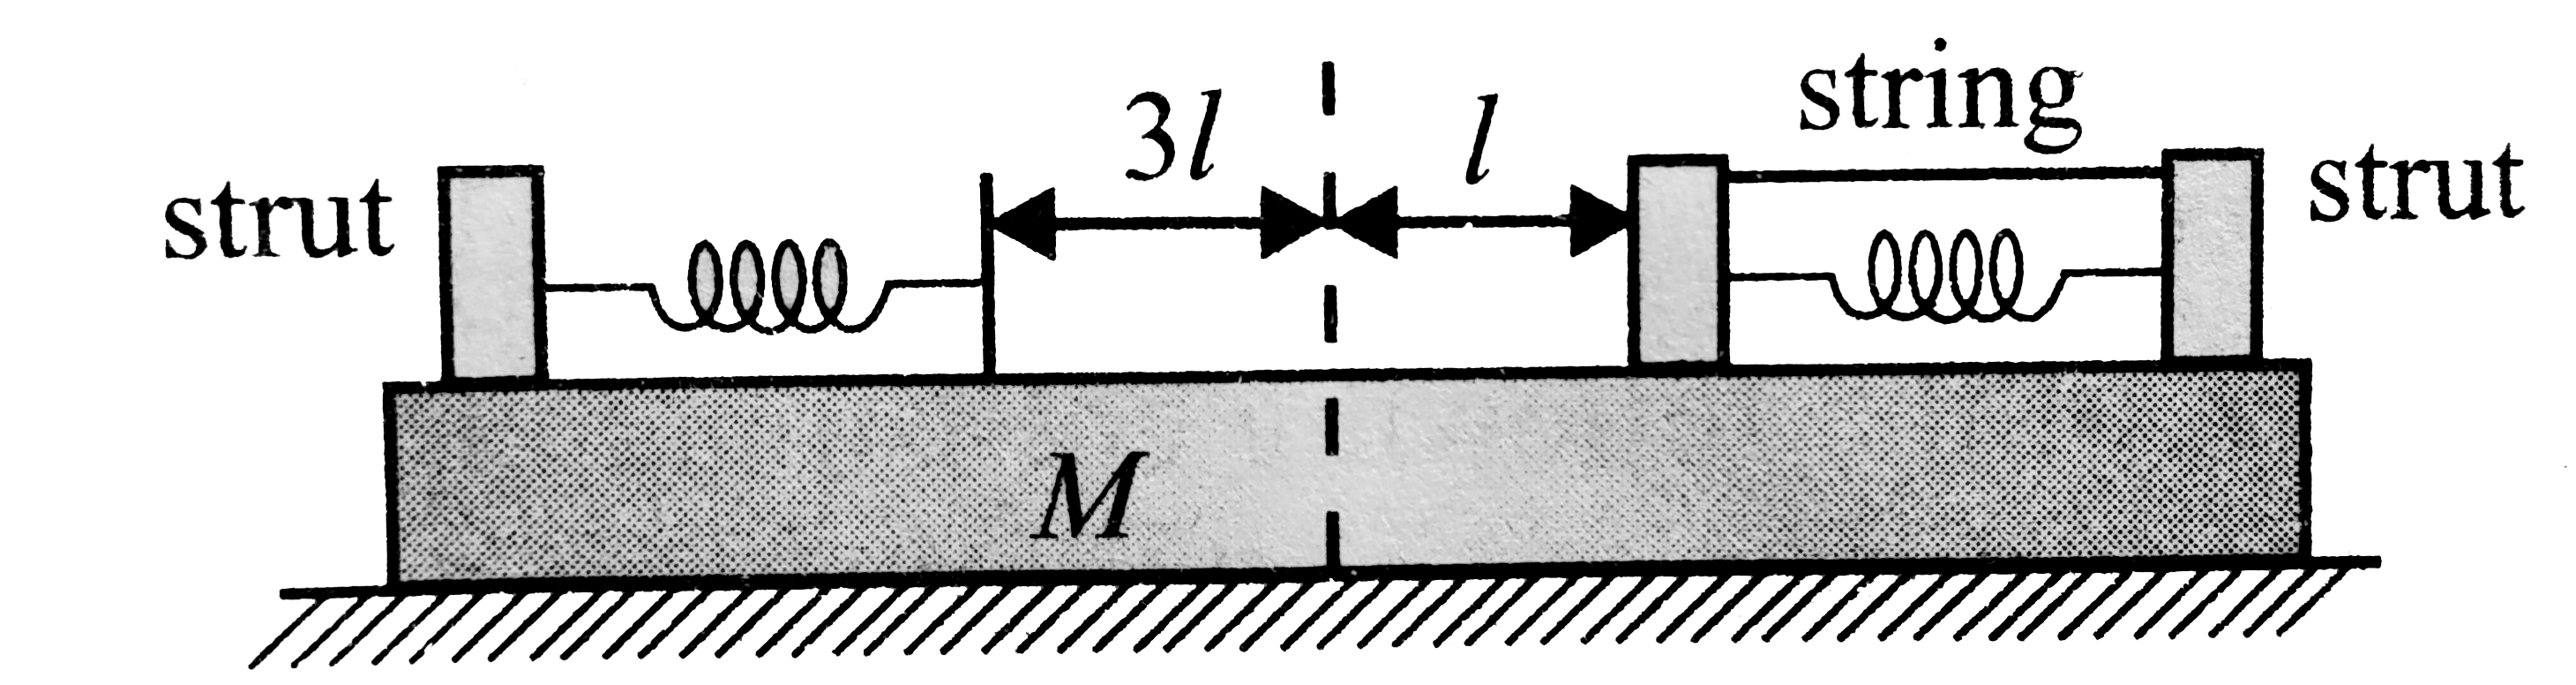 According to the principle of conservation of linear momentum if the external force acting on the system is zero, the linear momentum of the system will remain conserved. It means if the centre of mass of a system is initially at rest, it will remain at rest in the absence of external force, that is, the displacement of centre of mass will be zero.   A plank of mass M is placed on a smooth horizontal surface.  light identical springs, each of stiffness K, are rigidly connected to struts at the end of the plank as shown in Fig. When the springs are in their unextended position, the distance between their free ends is 3l. A block of mass m is placed on the plank and pressed against one of the springs so that it is compressed to l.  To keep the block at rest it is connected to the strut means of a light string. Initially, the system is at rest, Now the string is burnt.      The maximum velocity of the plank is